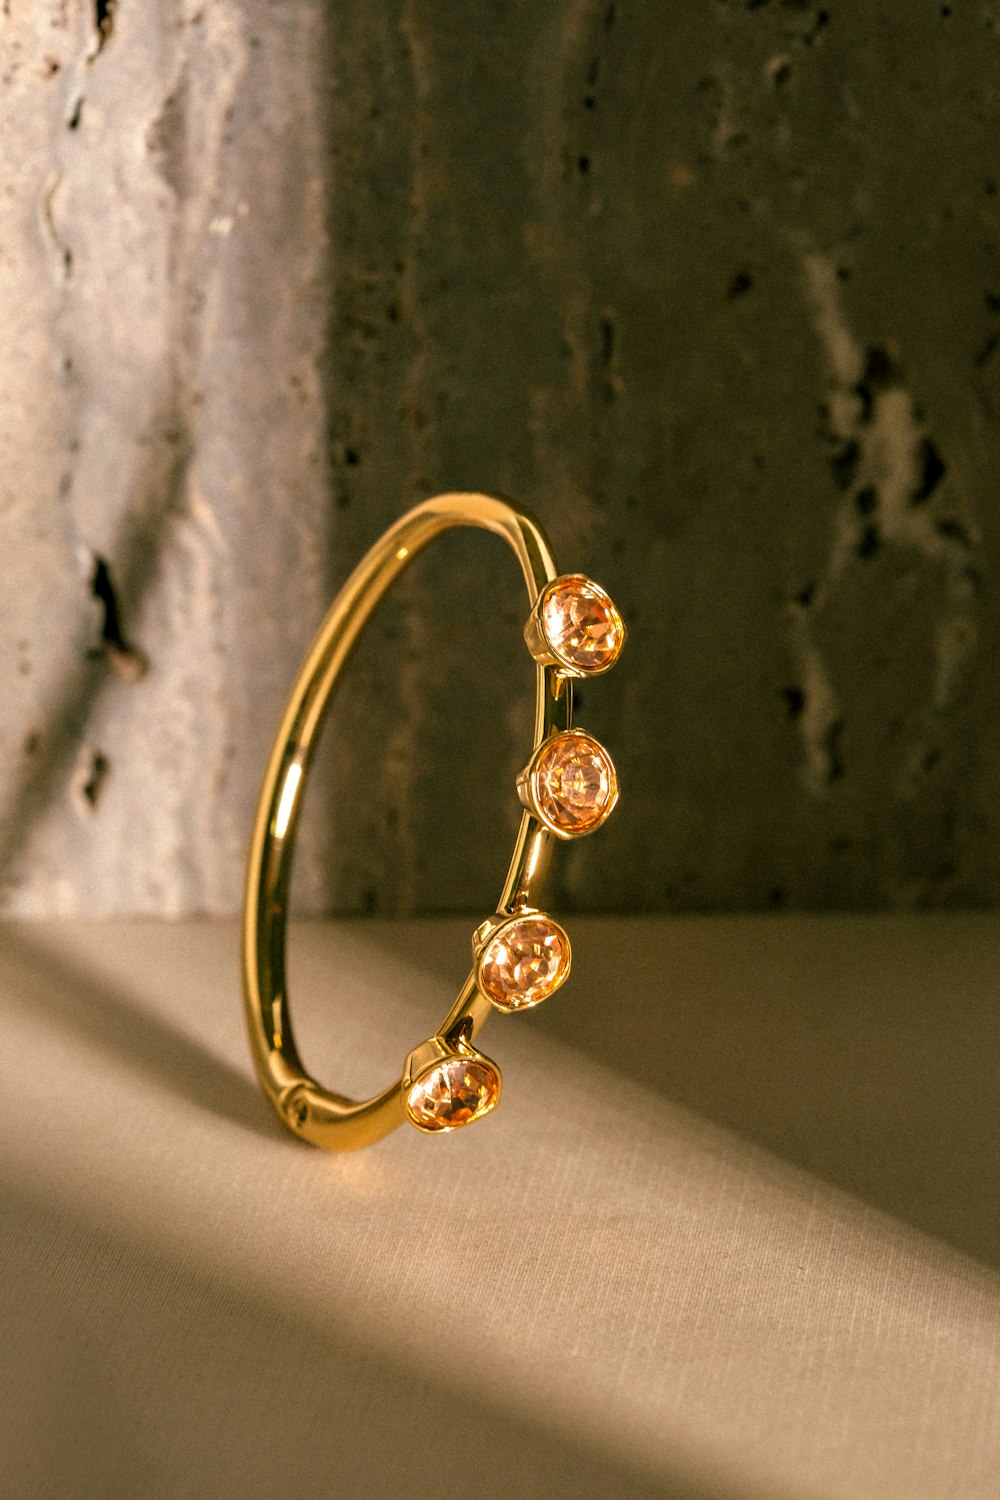 a close up of a gold ring on a table